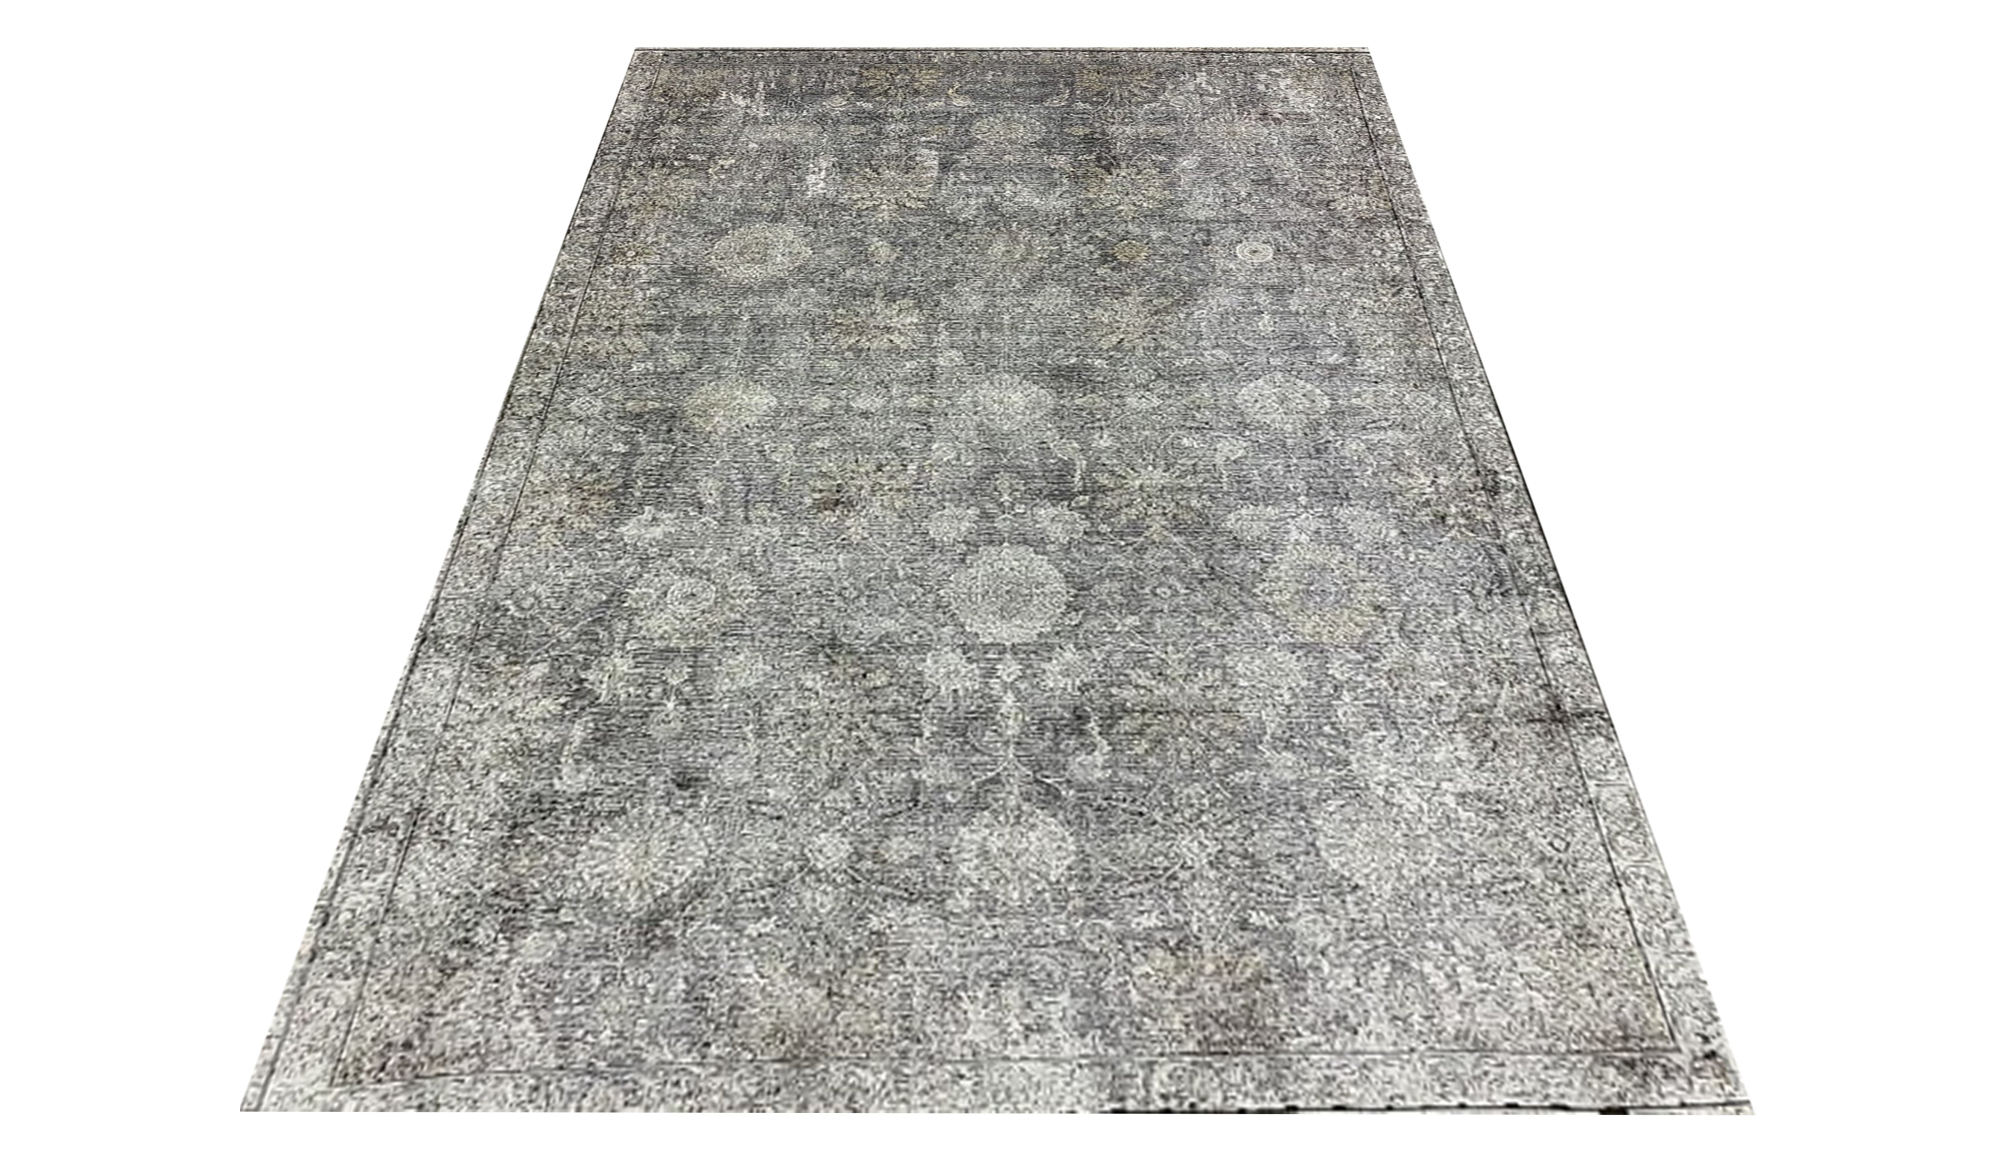 Soho Grey/Brown Woven Rug-Area rug for living room, dining area, and bedroom